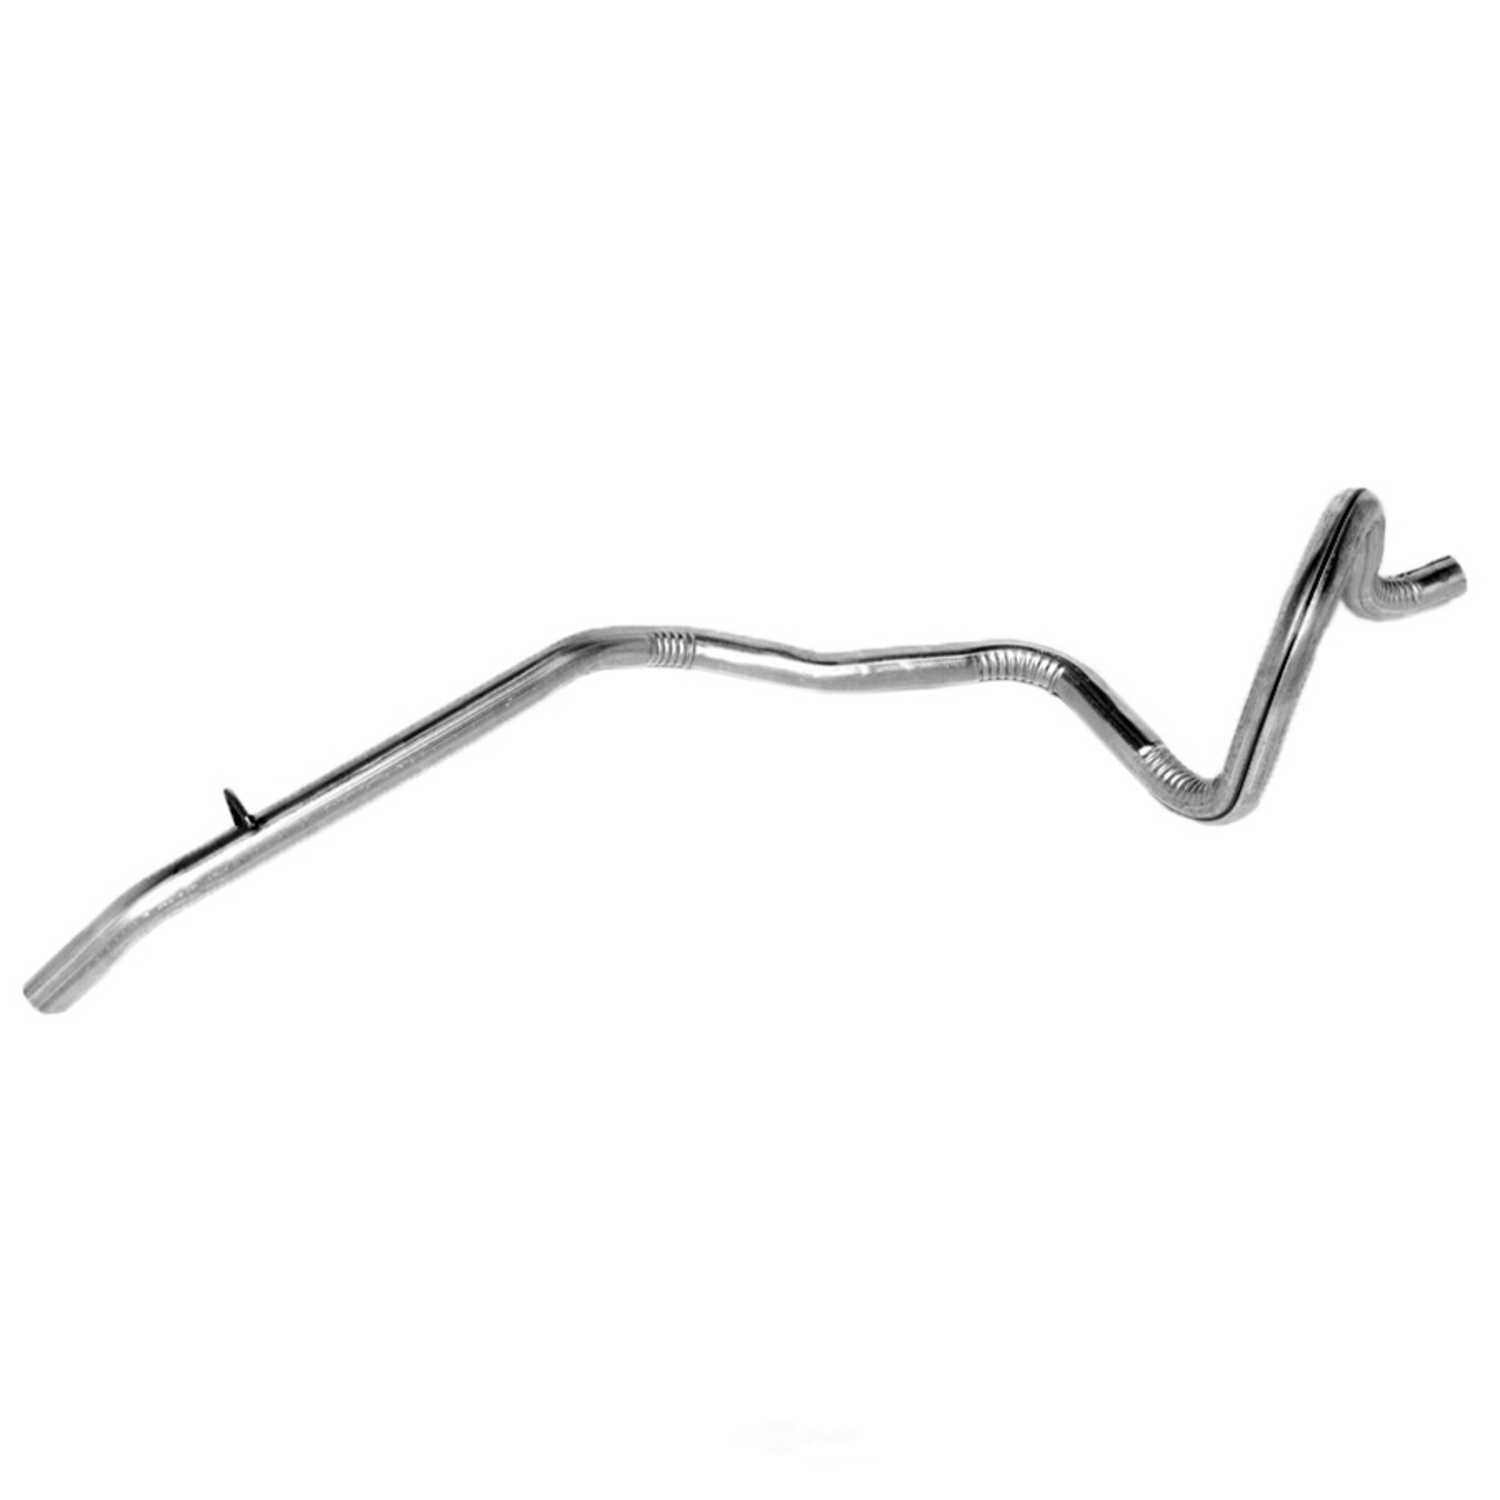 WALKER - Exhaust Tail Pipe - WAL 56007